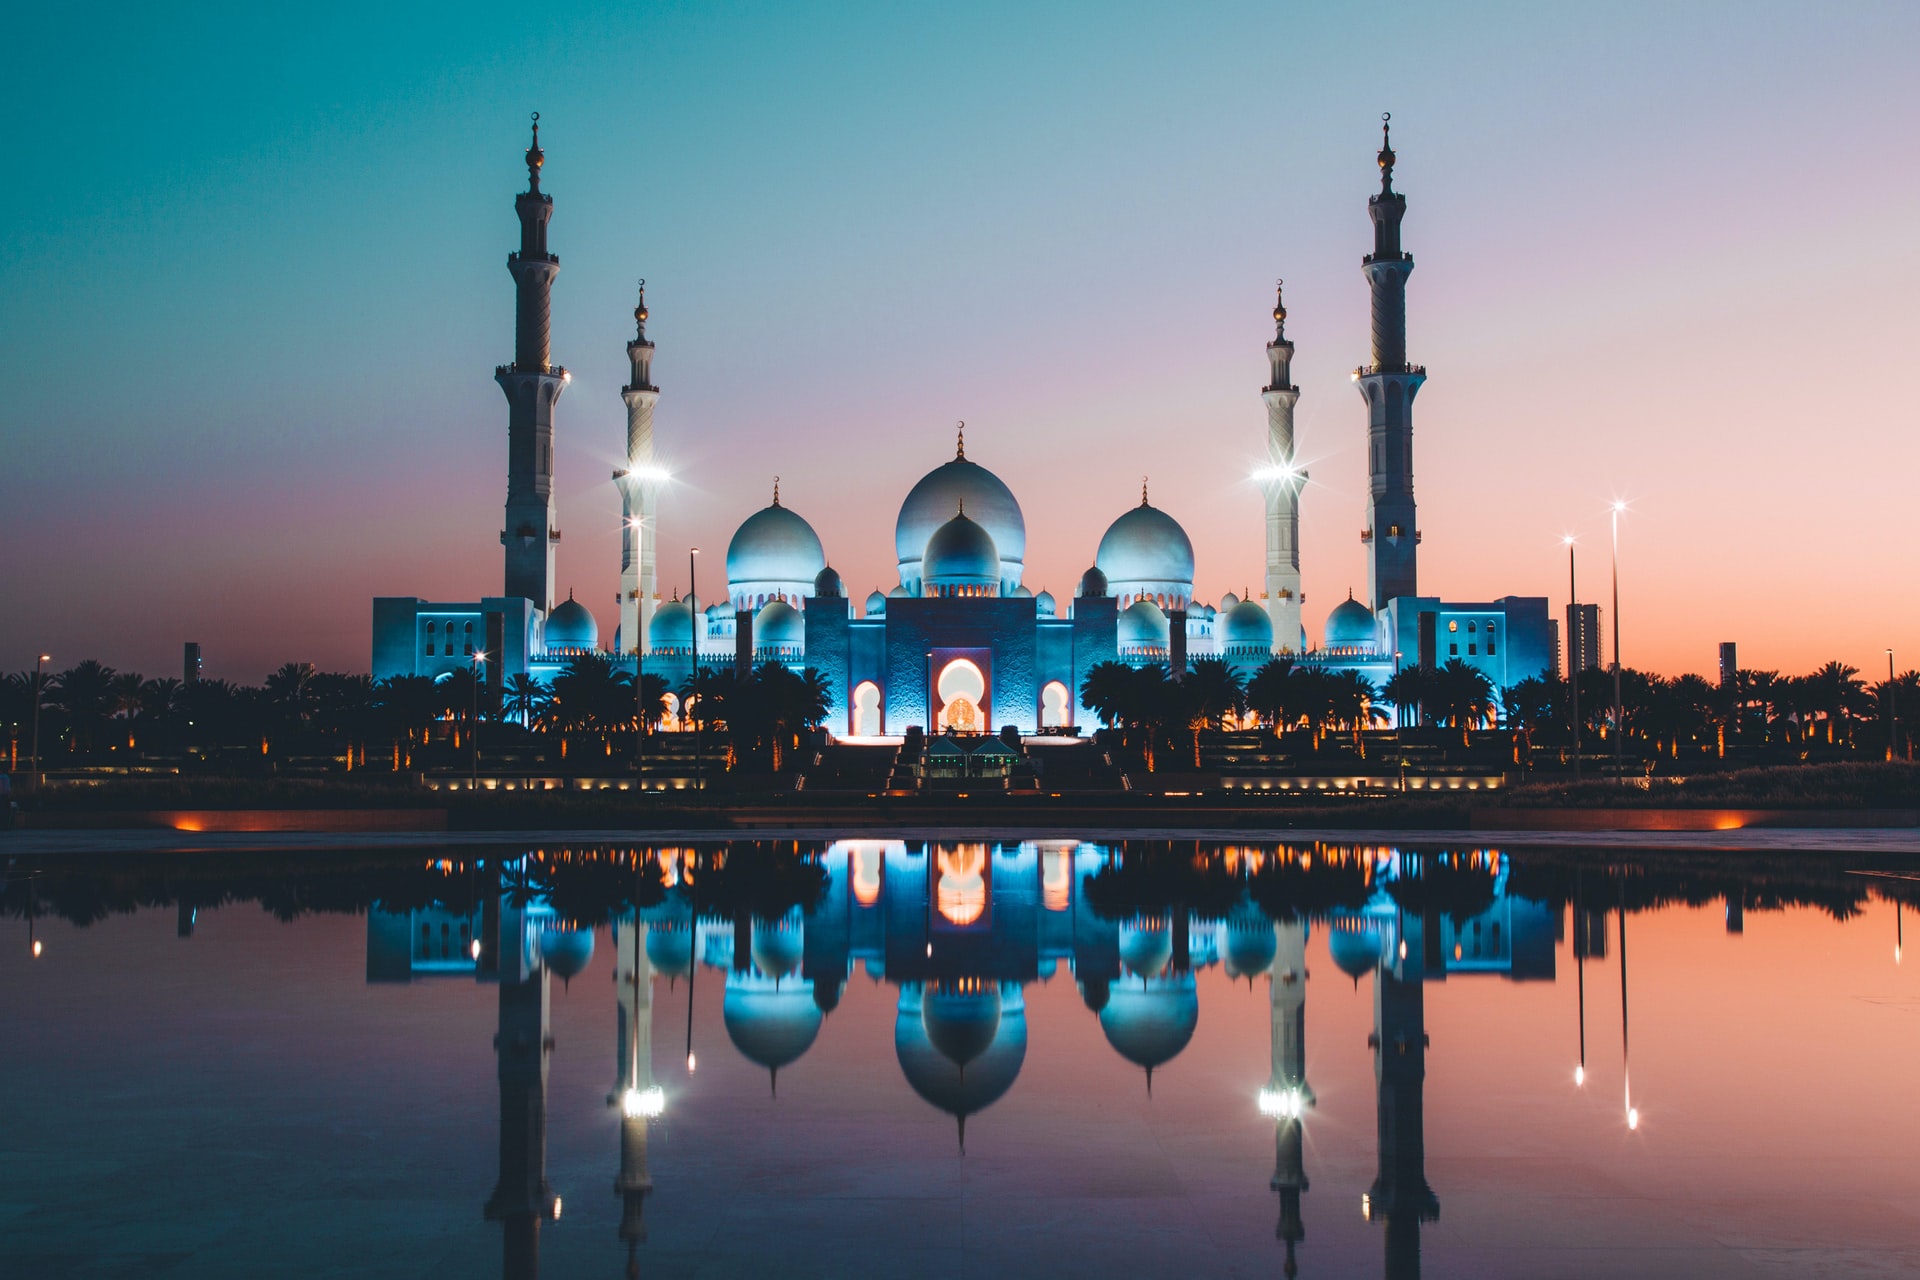 <p>A guided tour through Dubai will allow you to discover the Blue Mosque with its 12 domes, Palm Island, and the Burj Al Arab; you will also take an aquatic taxi to visit the Gold and Spice bazaars.</p> <p>Image: Unsplash - David Rodrigo</p>